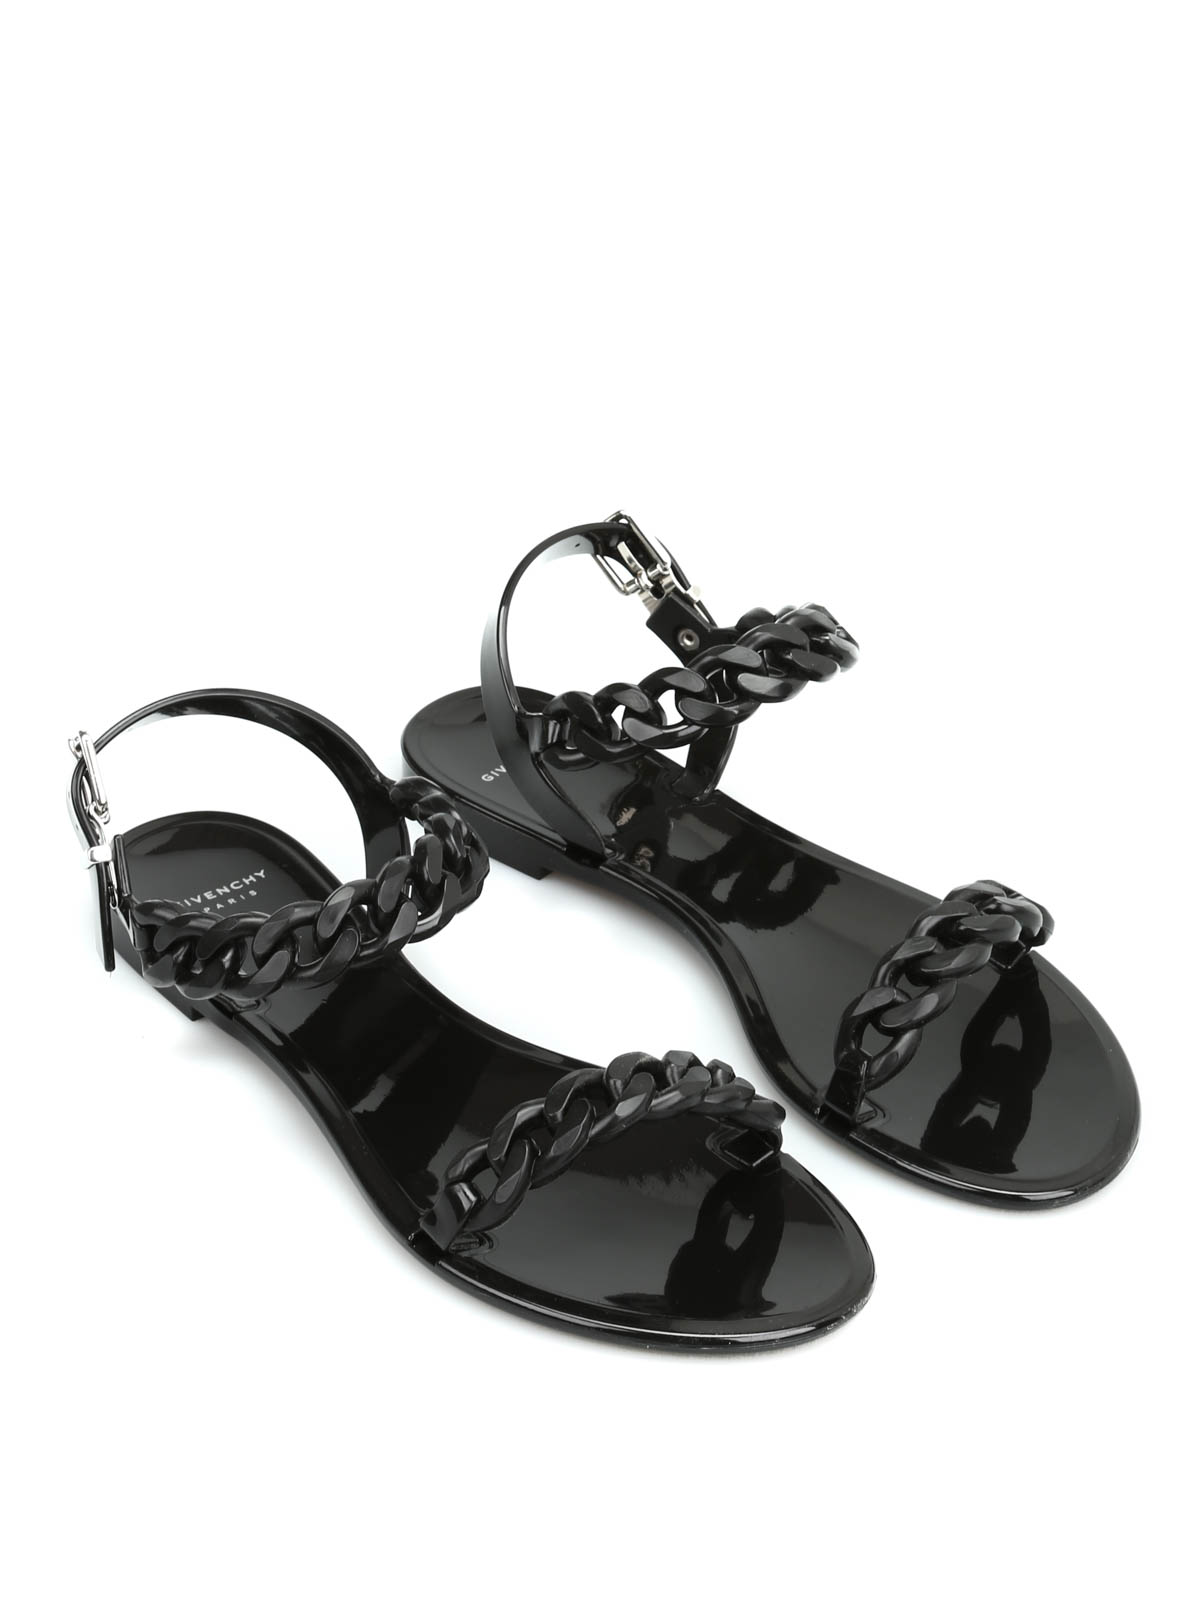 Top 47+ imagen givenchy rubber sandals